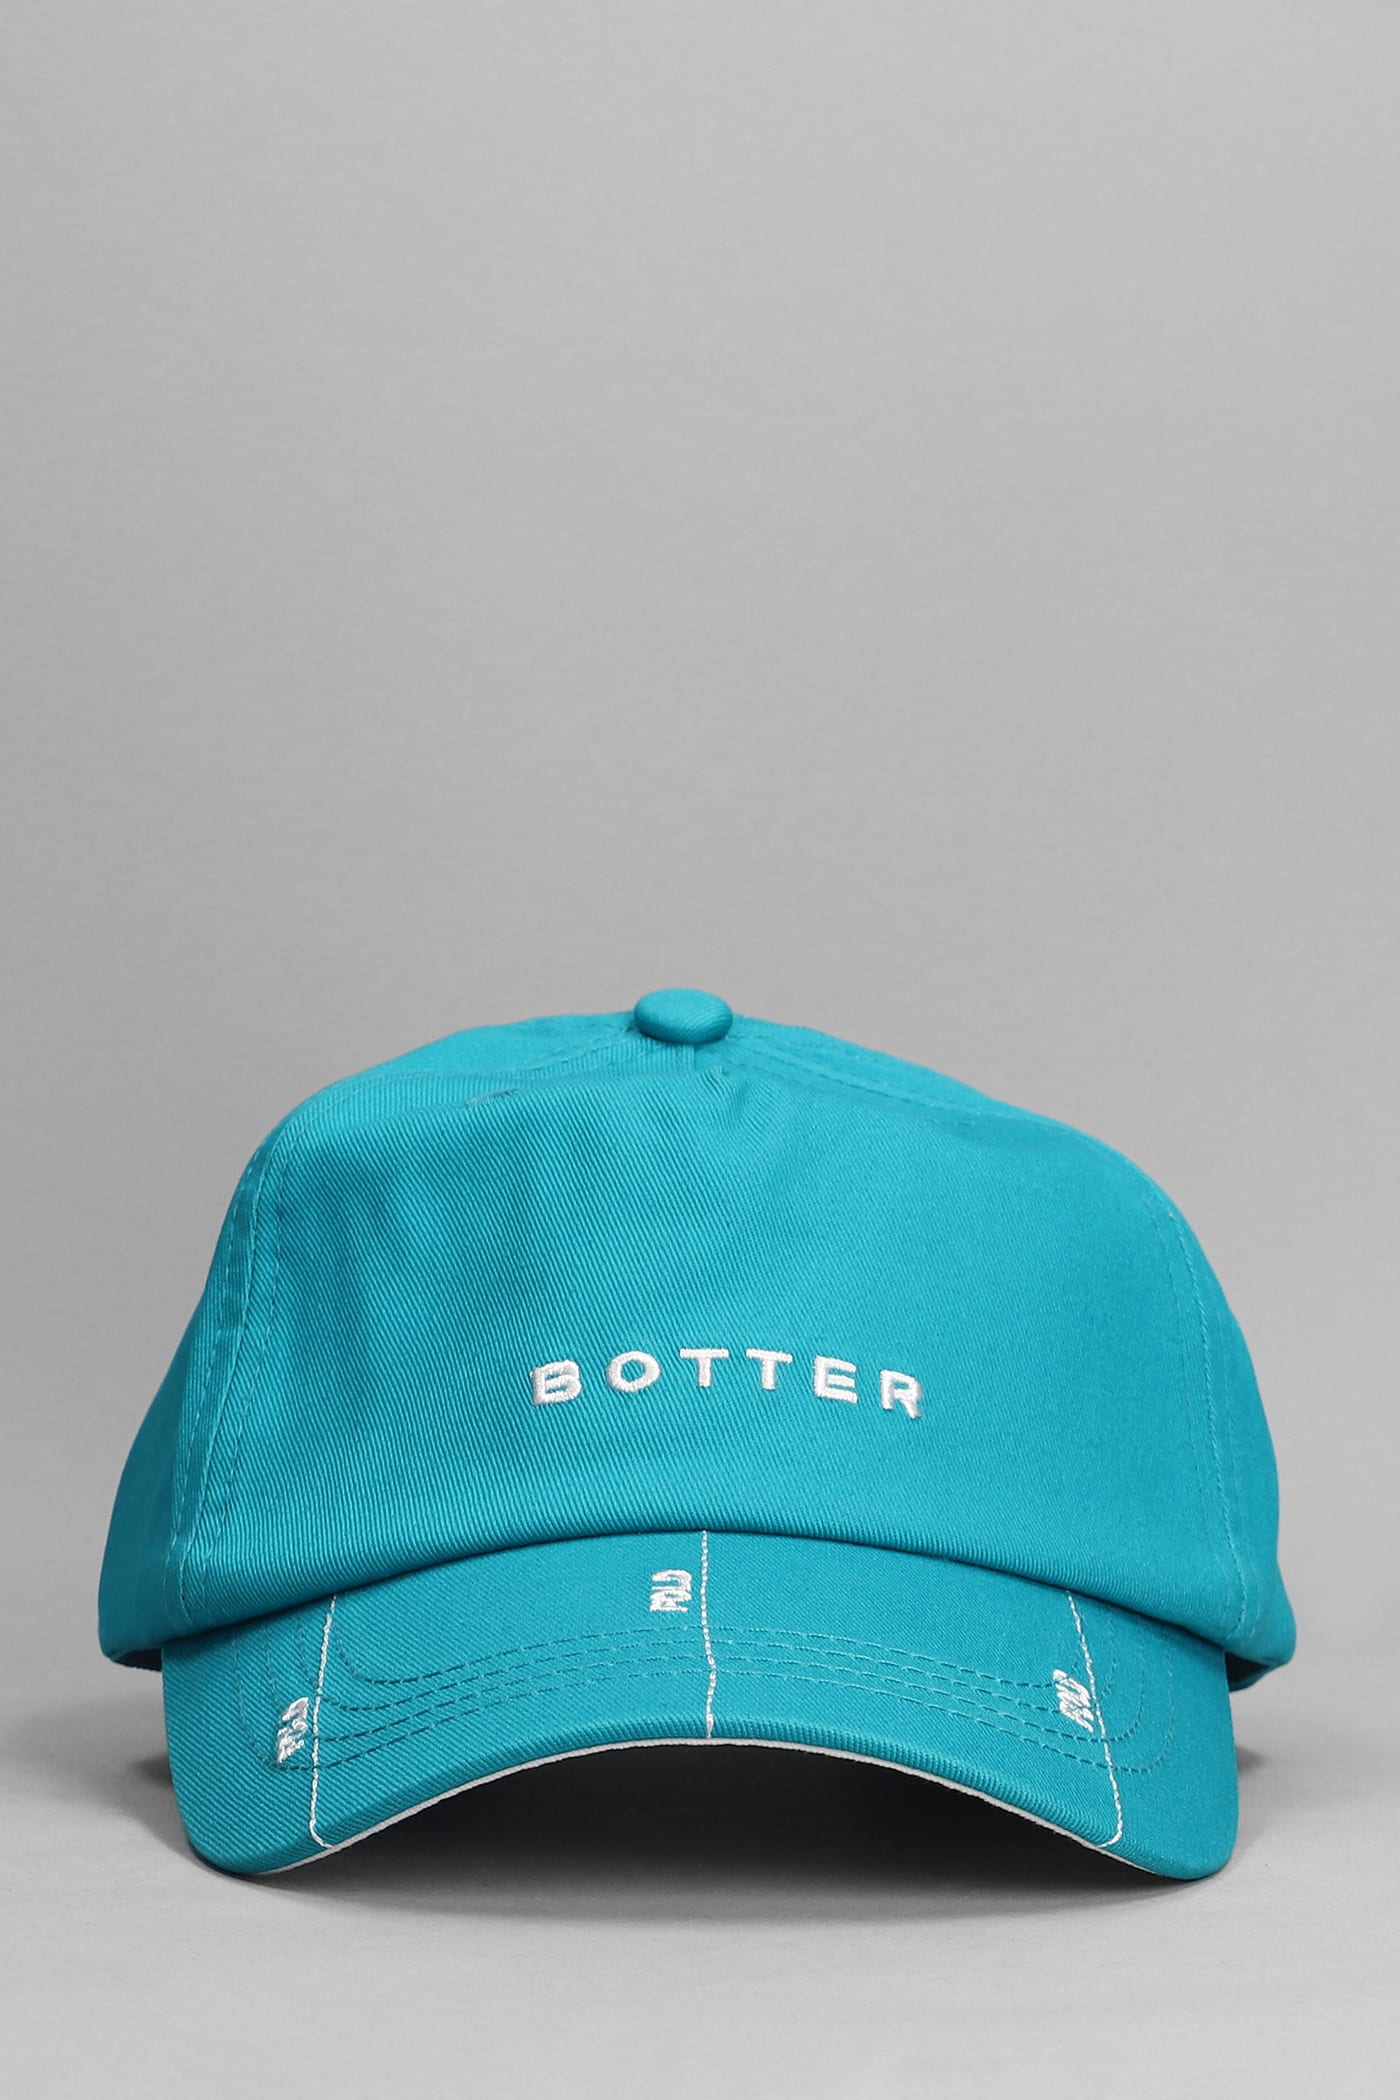 Botter Hats In Blue Cotton